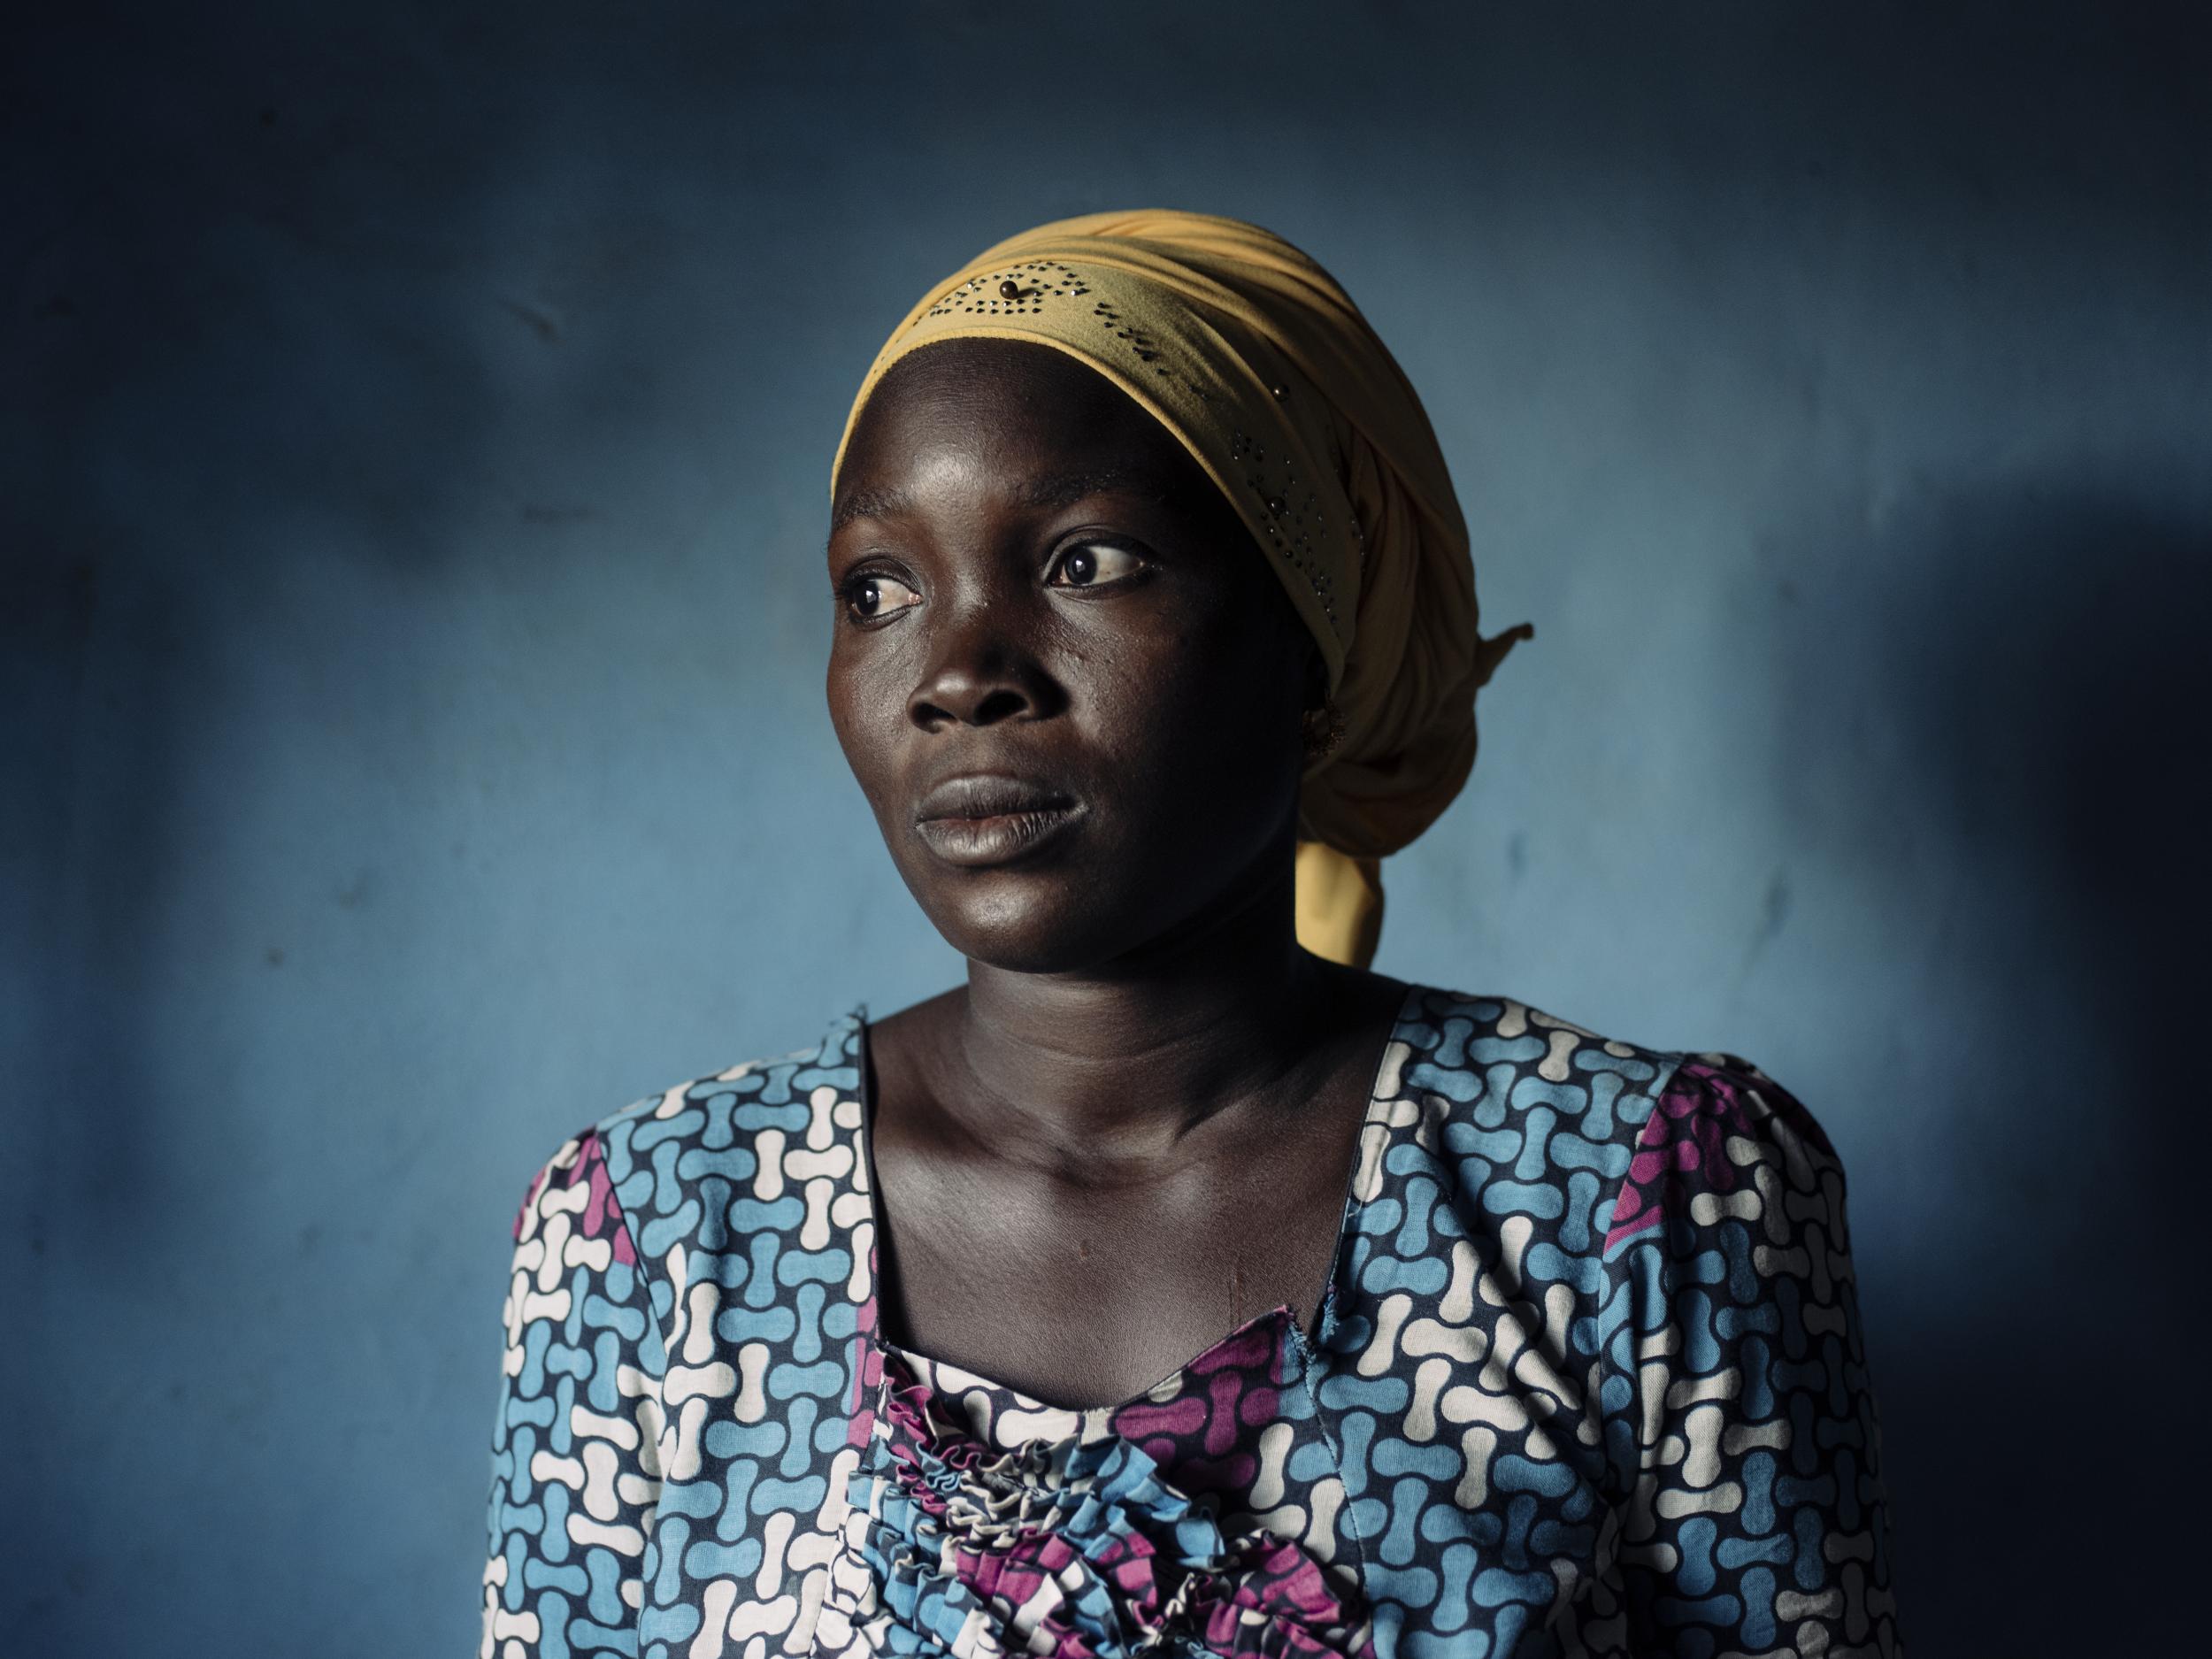 Photojournalist Paddy Dowling travelled to Senegal, a country torn apart by...